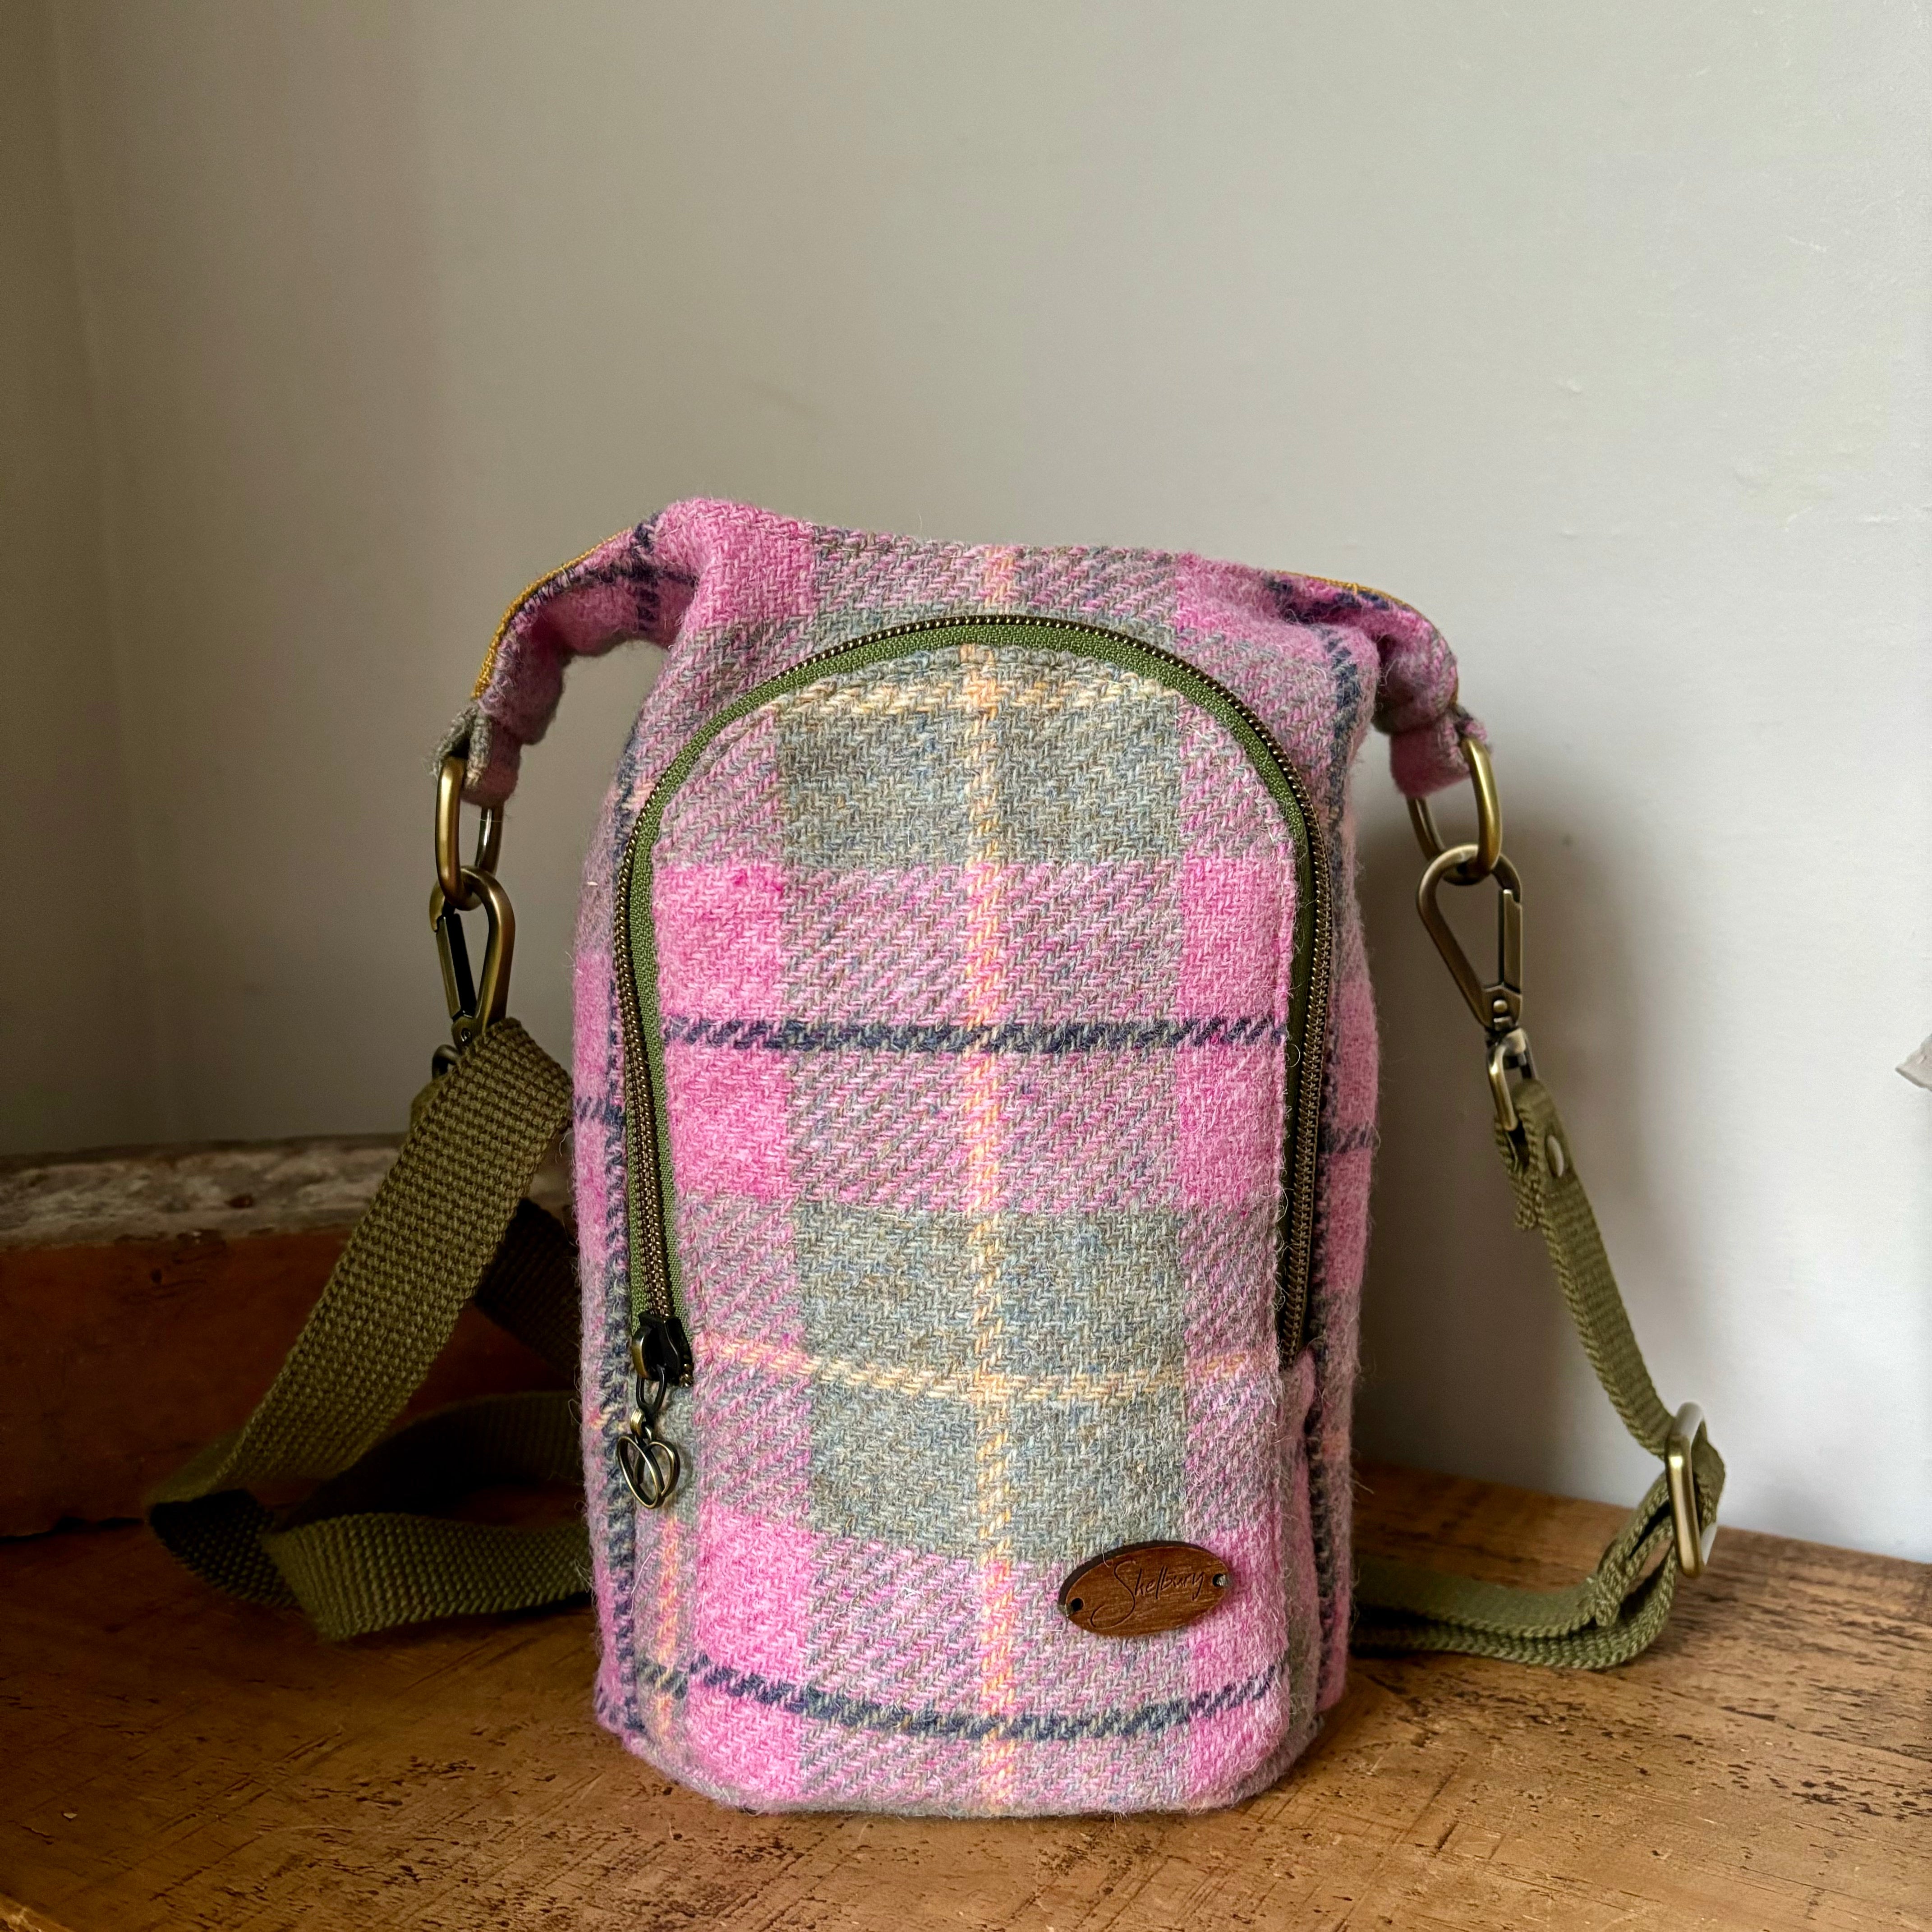 Limited Edition Sparkling Spirit Harris Tweed Bottle Bag in pastel pink, green, yellow with a stripe of blue.